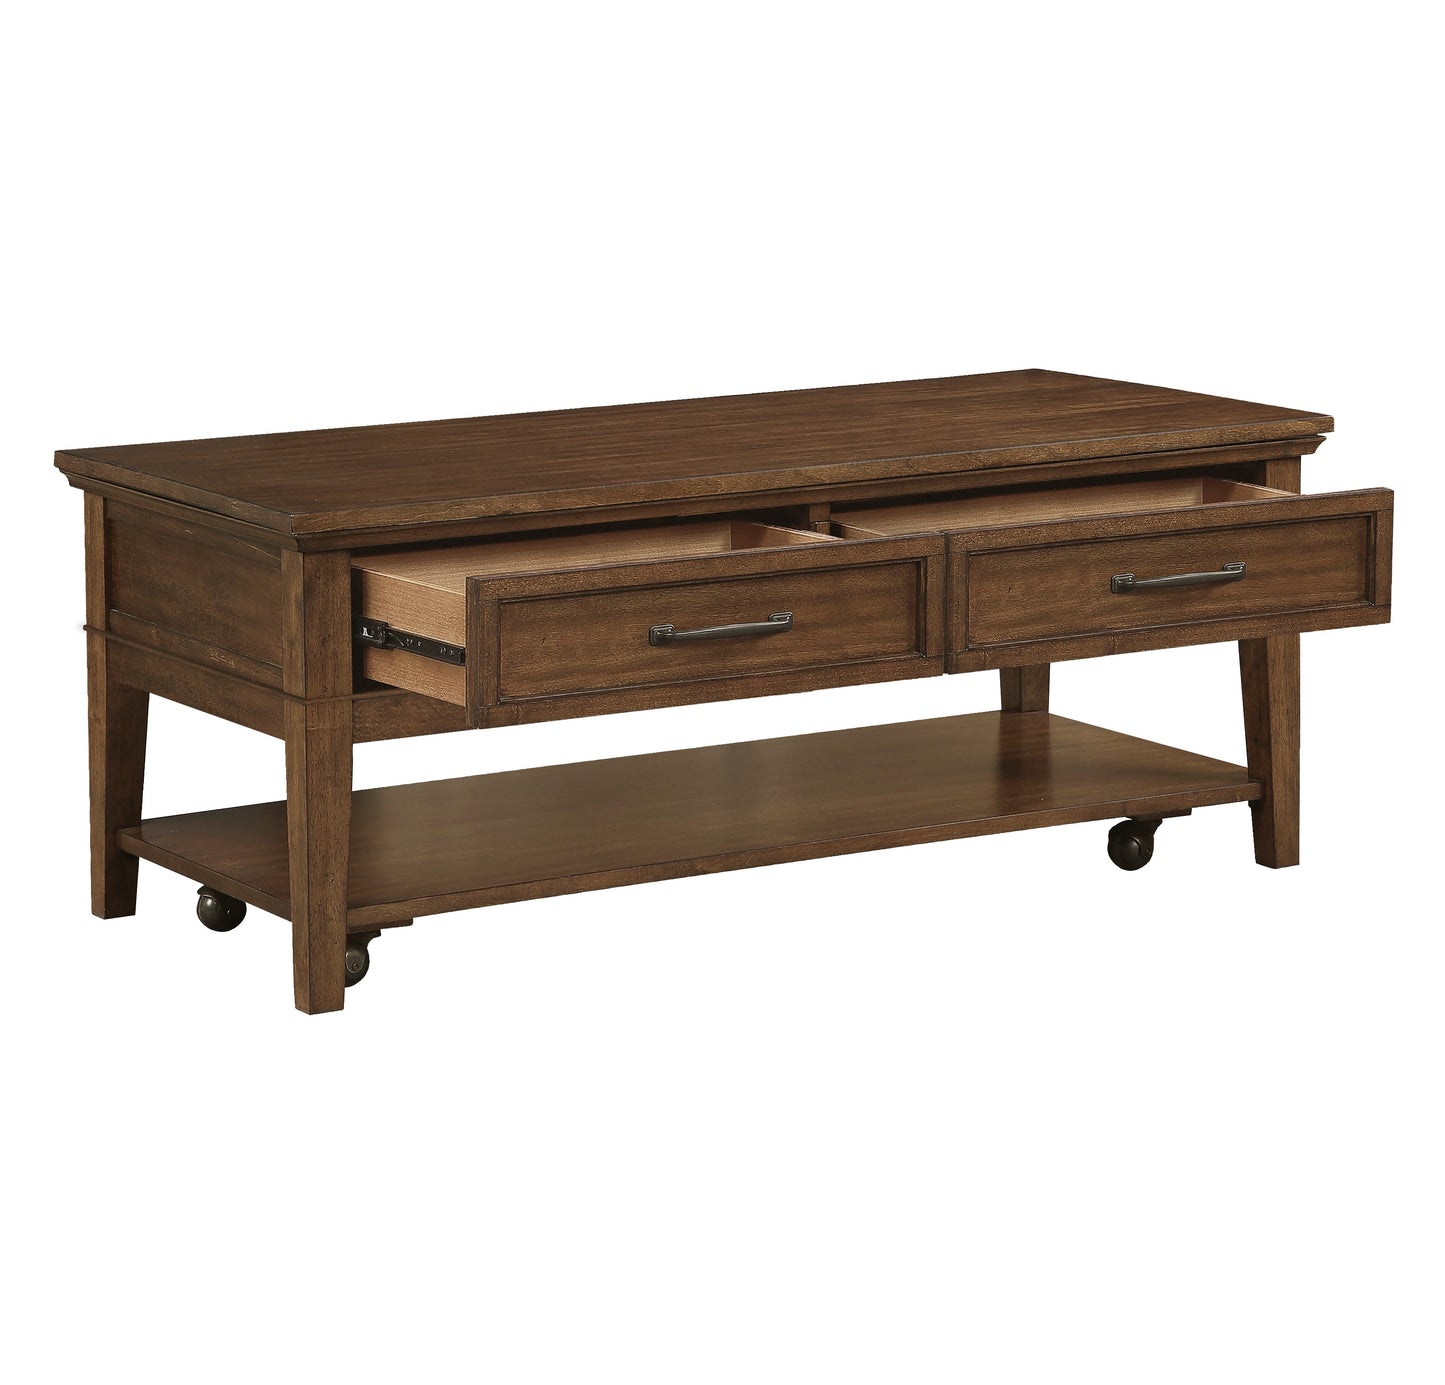 Whitley Coffee Table BROWN ONLY